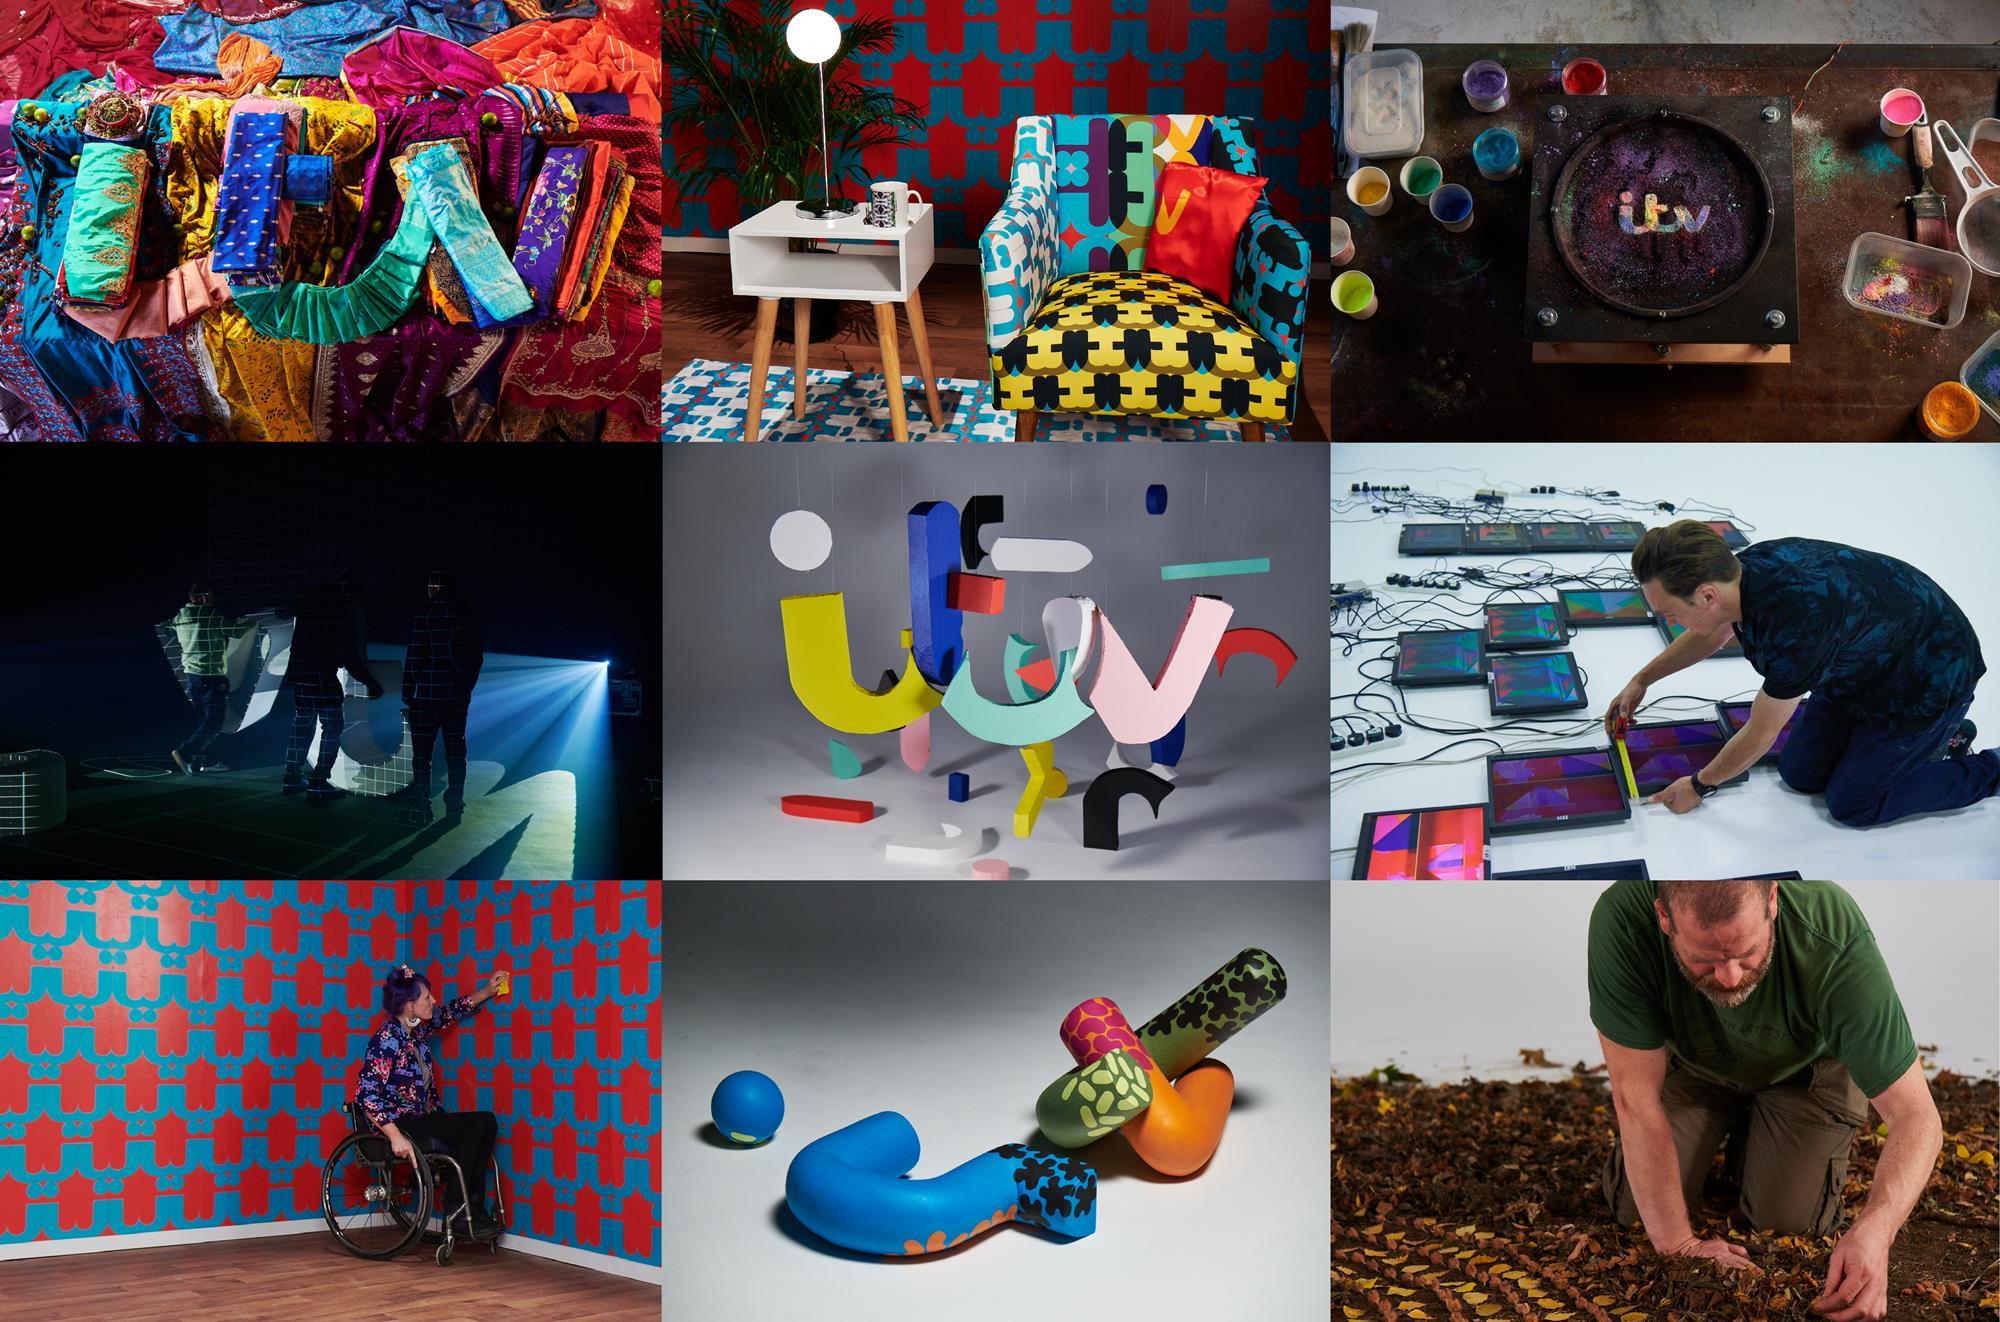 Artists take over ITV idents | News | Broadcast